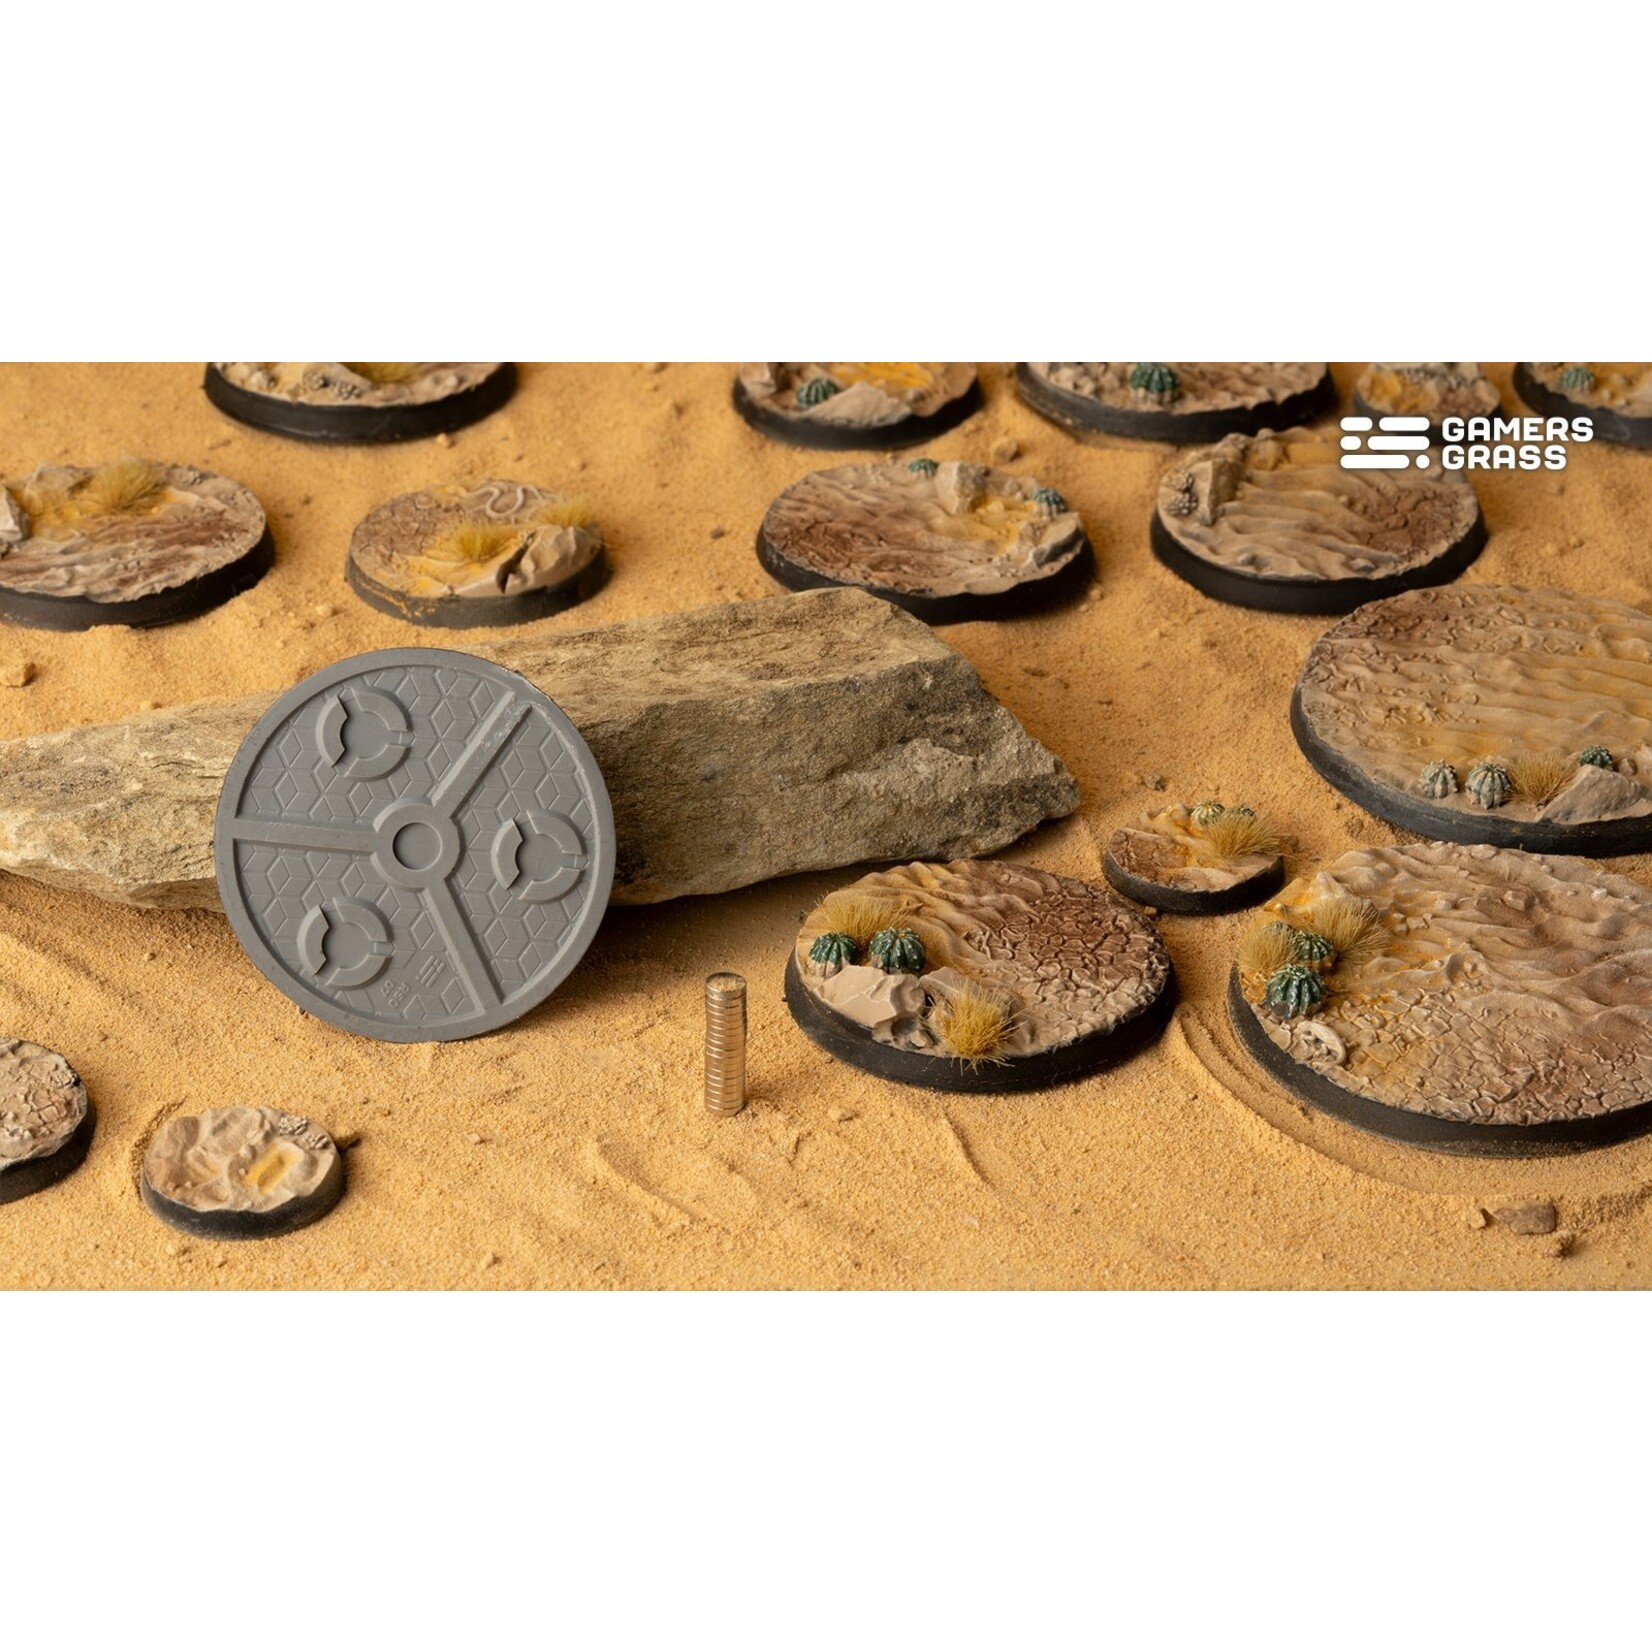 Gamers Grass Deserts of Maahl Bases Pre-Painted (3x 50mm Round)